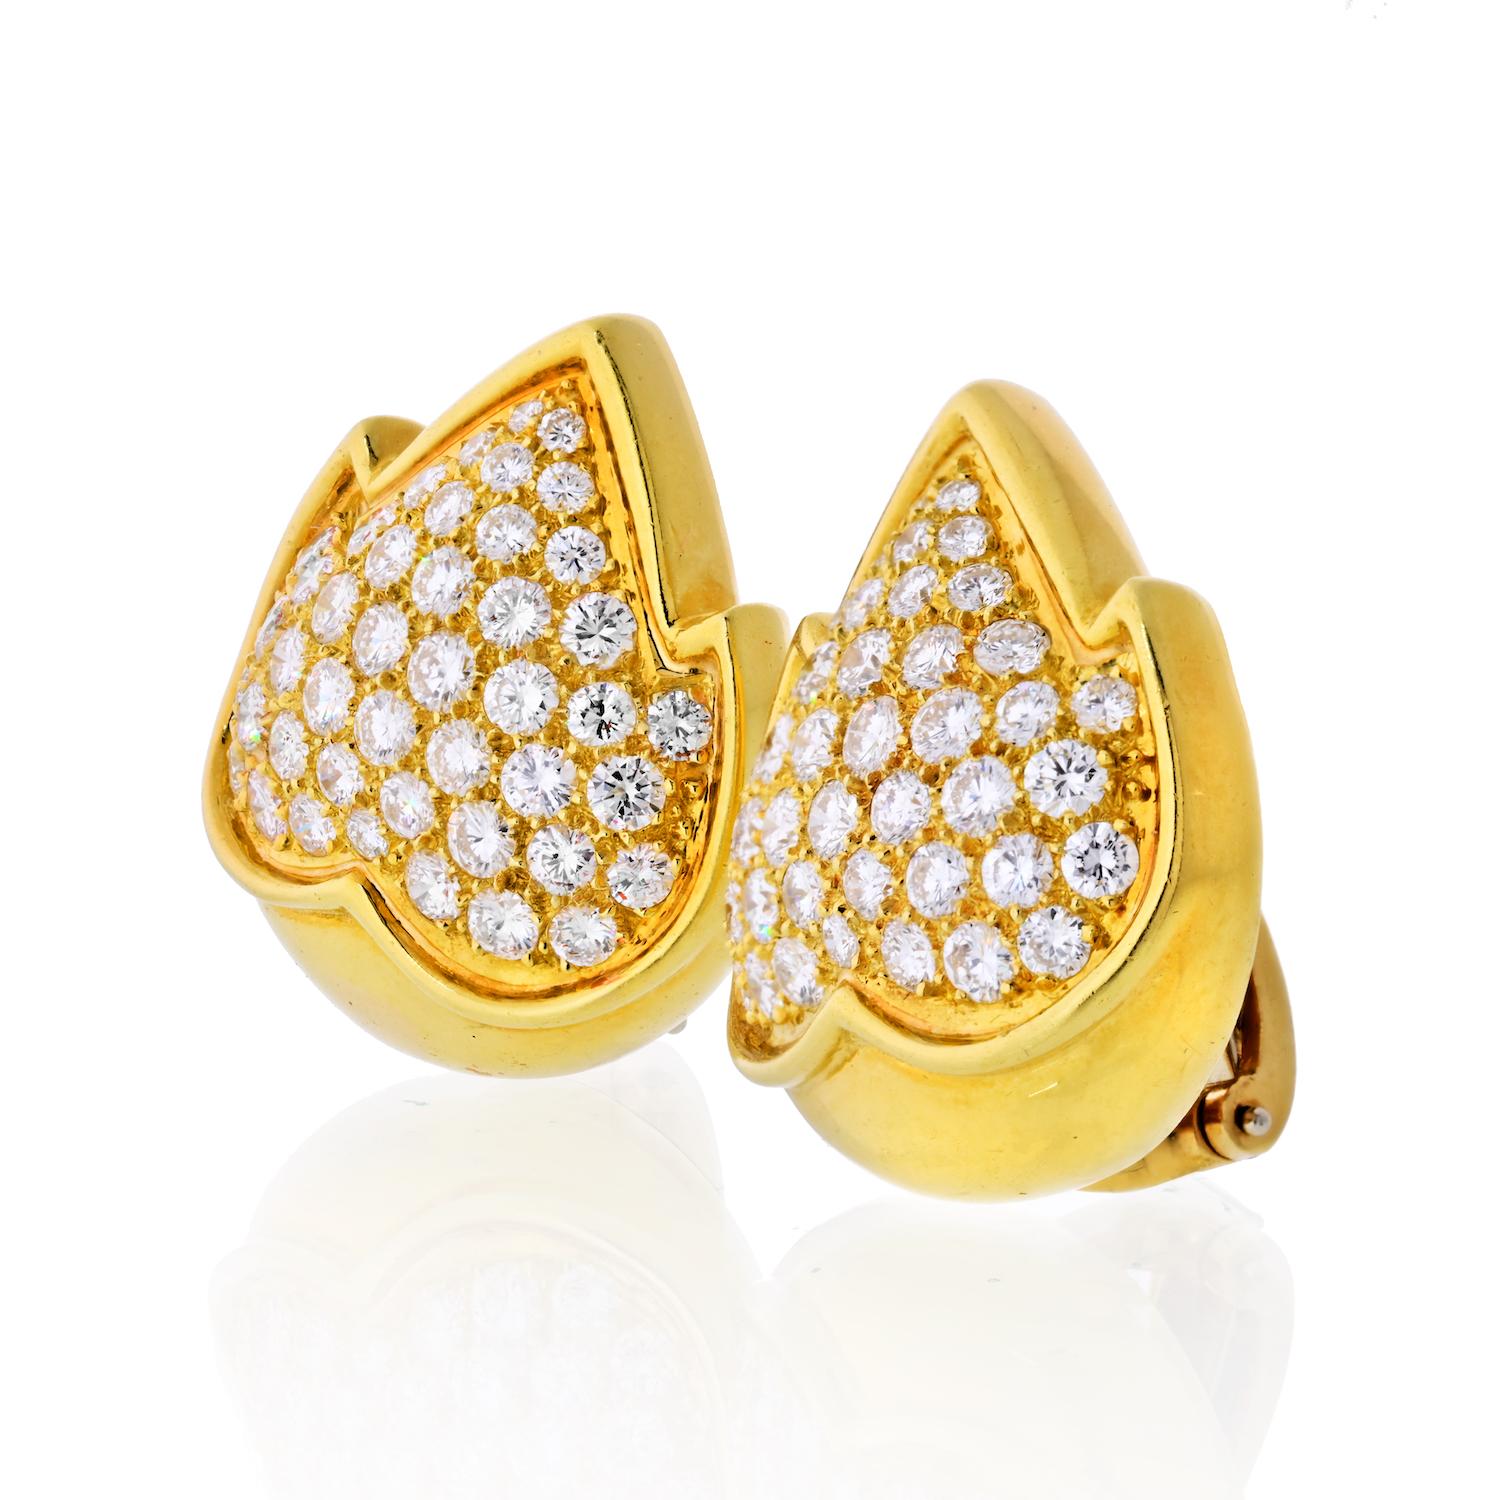 Van Cleef and Arpels has defined the cutting edge of fine jewelry for decades, and their contributions to design and innovation can be experienced with every authentic VCA creation in The Back Vault's collection. 

These vintage diamond earrings by